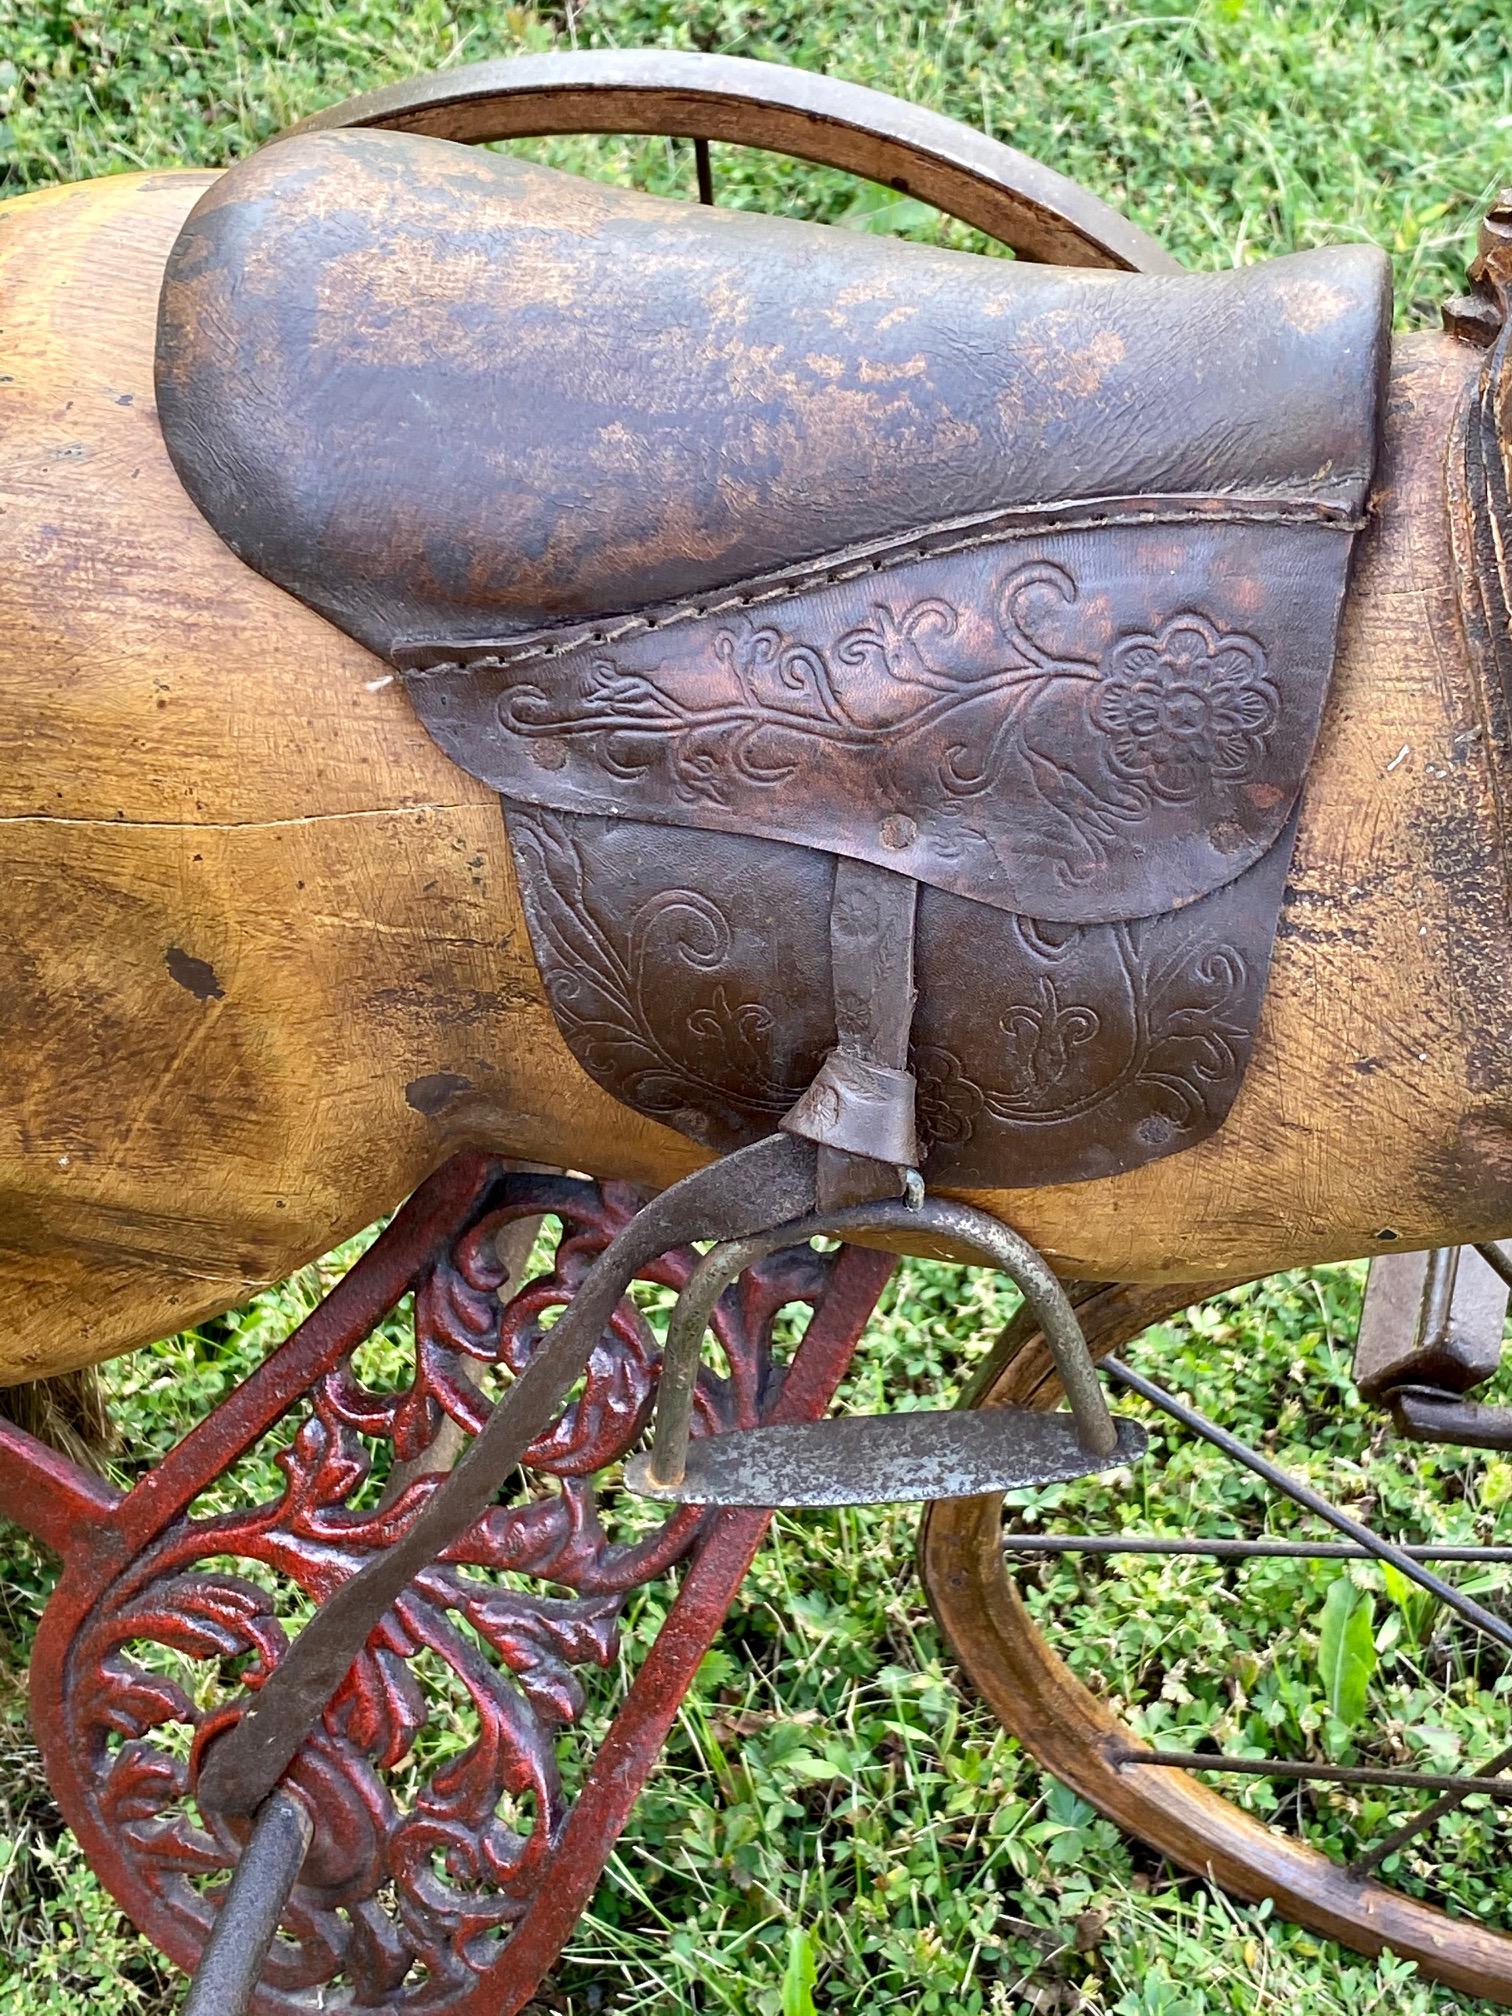 A charming reproduction horse bicycle having carved wood, leather saddle, iron wheels, glass eyes and rope tail. Child size, functional, but we suggest it more as a decorative accessory for a family room or such.
Measure: Seat height 22.